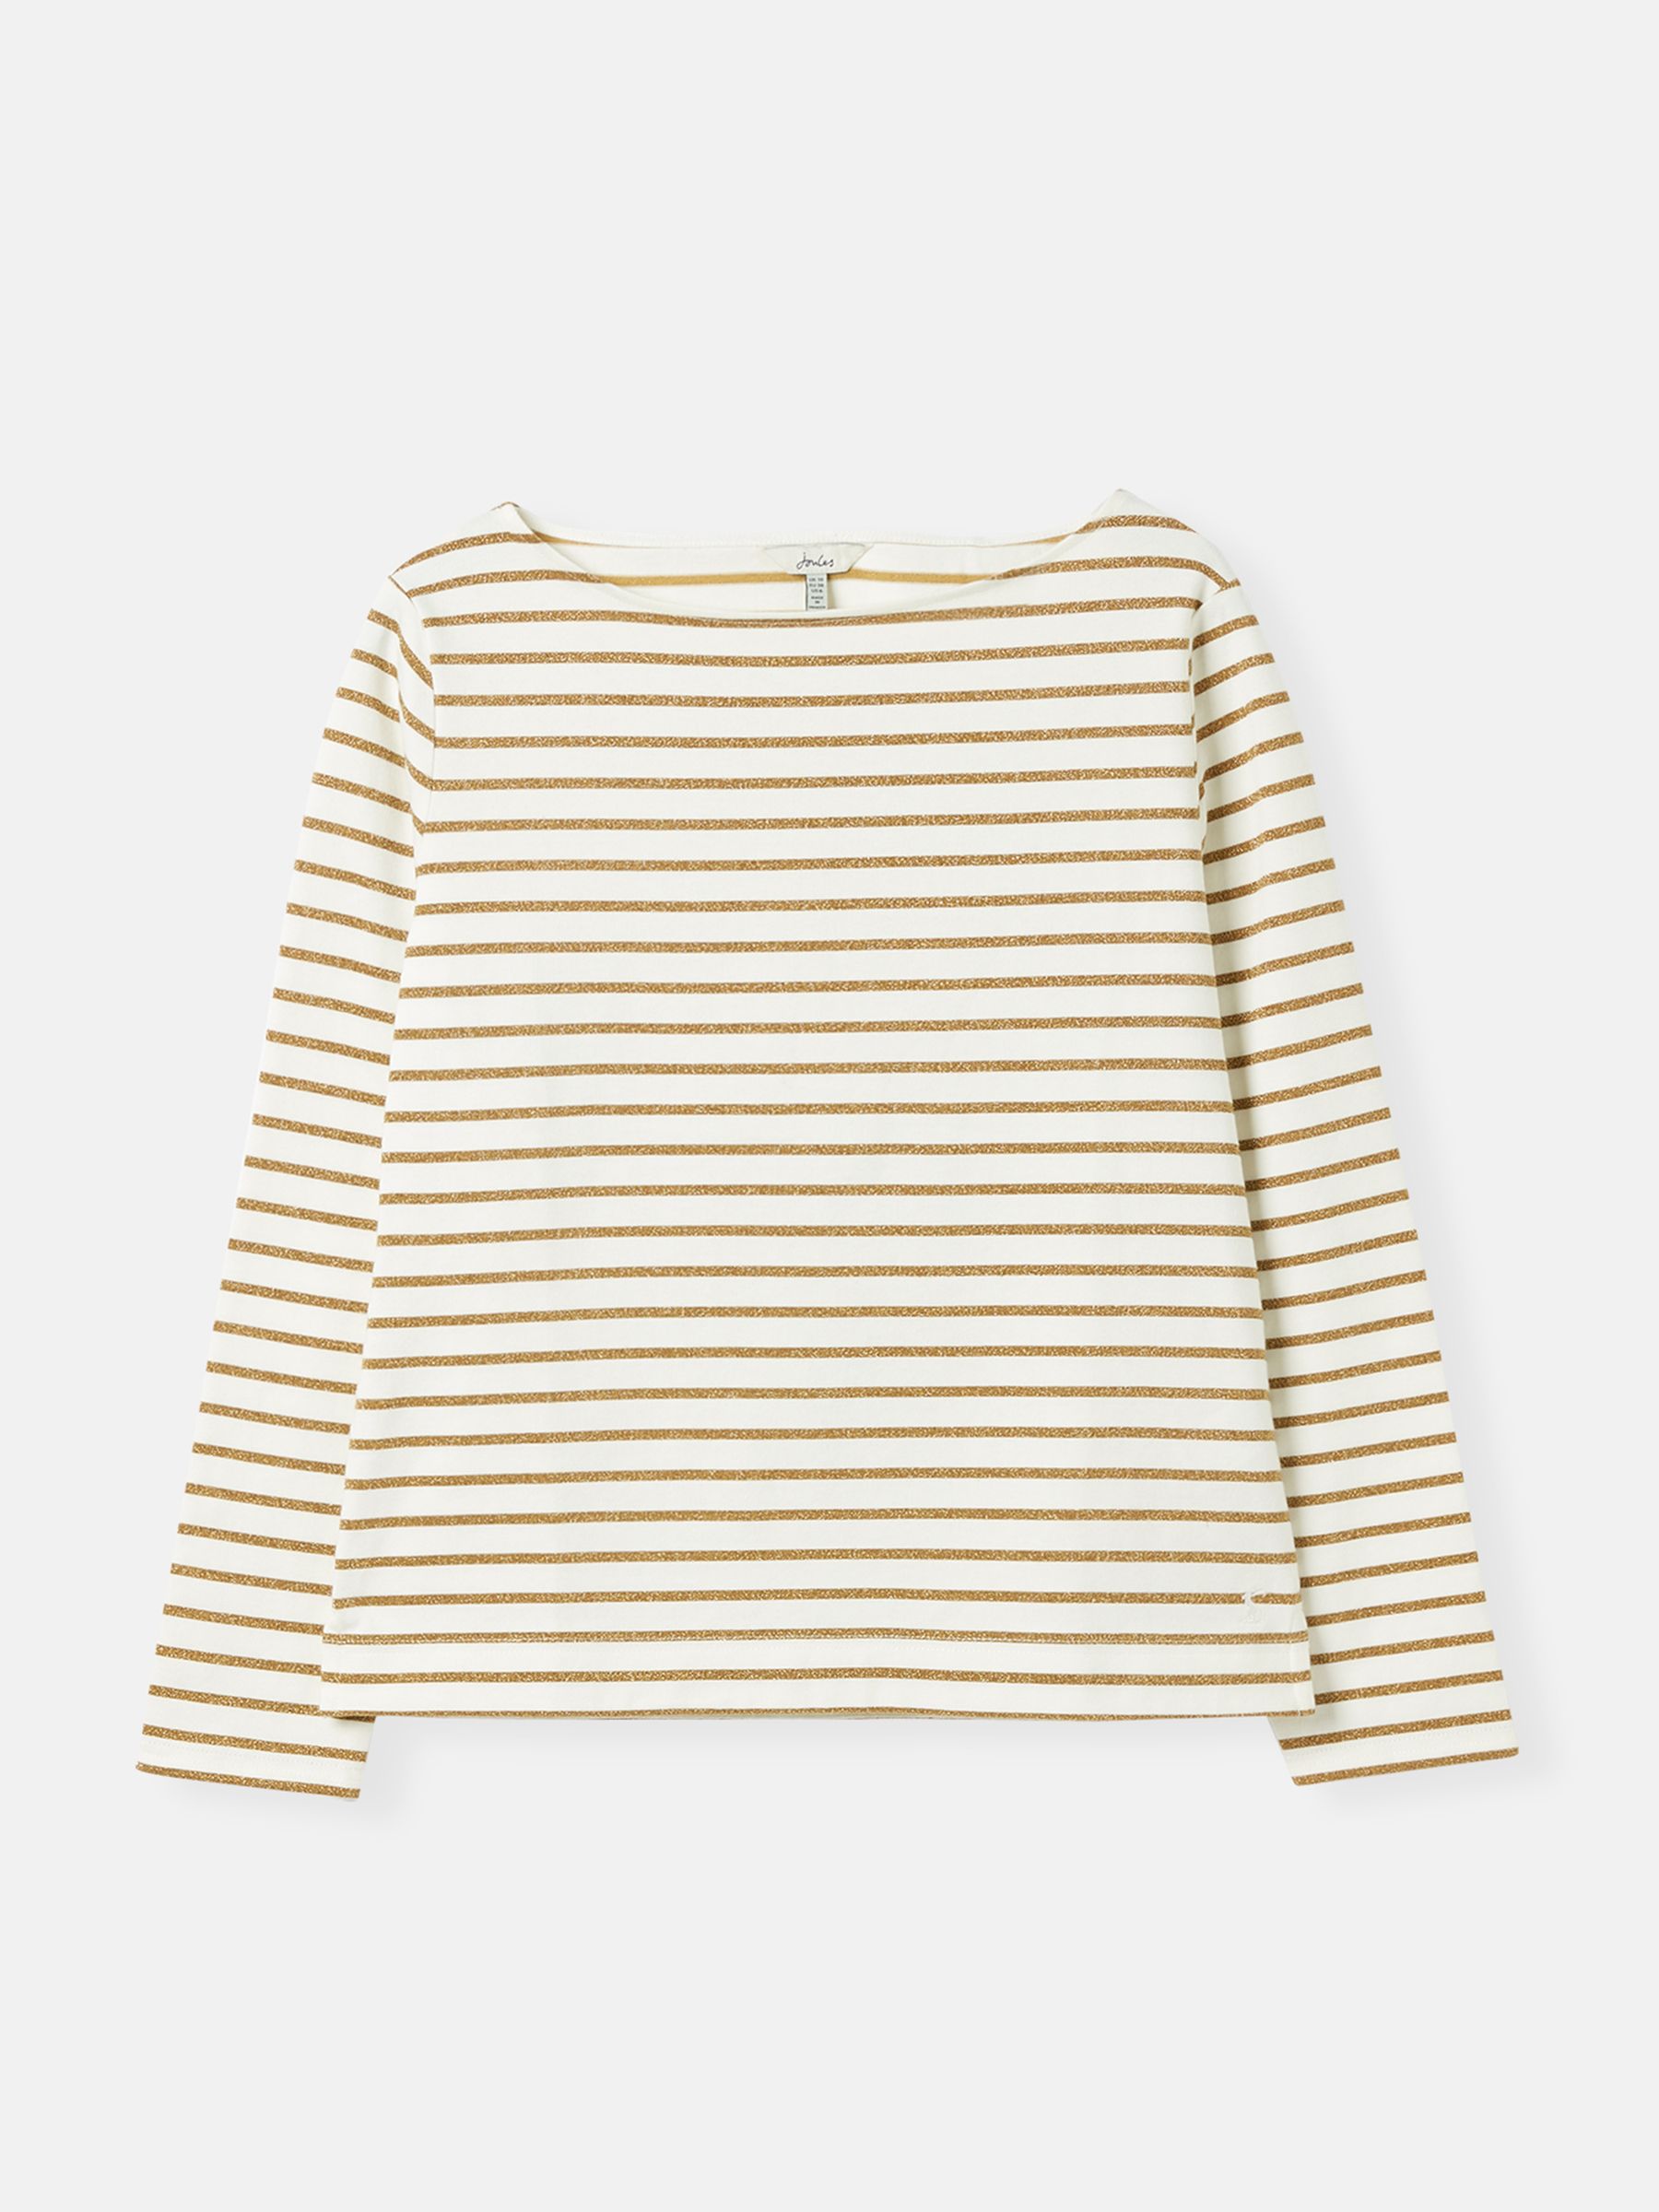 Buy Joules Harbour Long Sleeve Breton Top from the Joules online shop